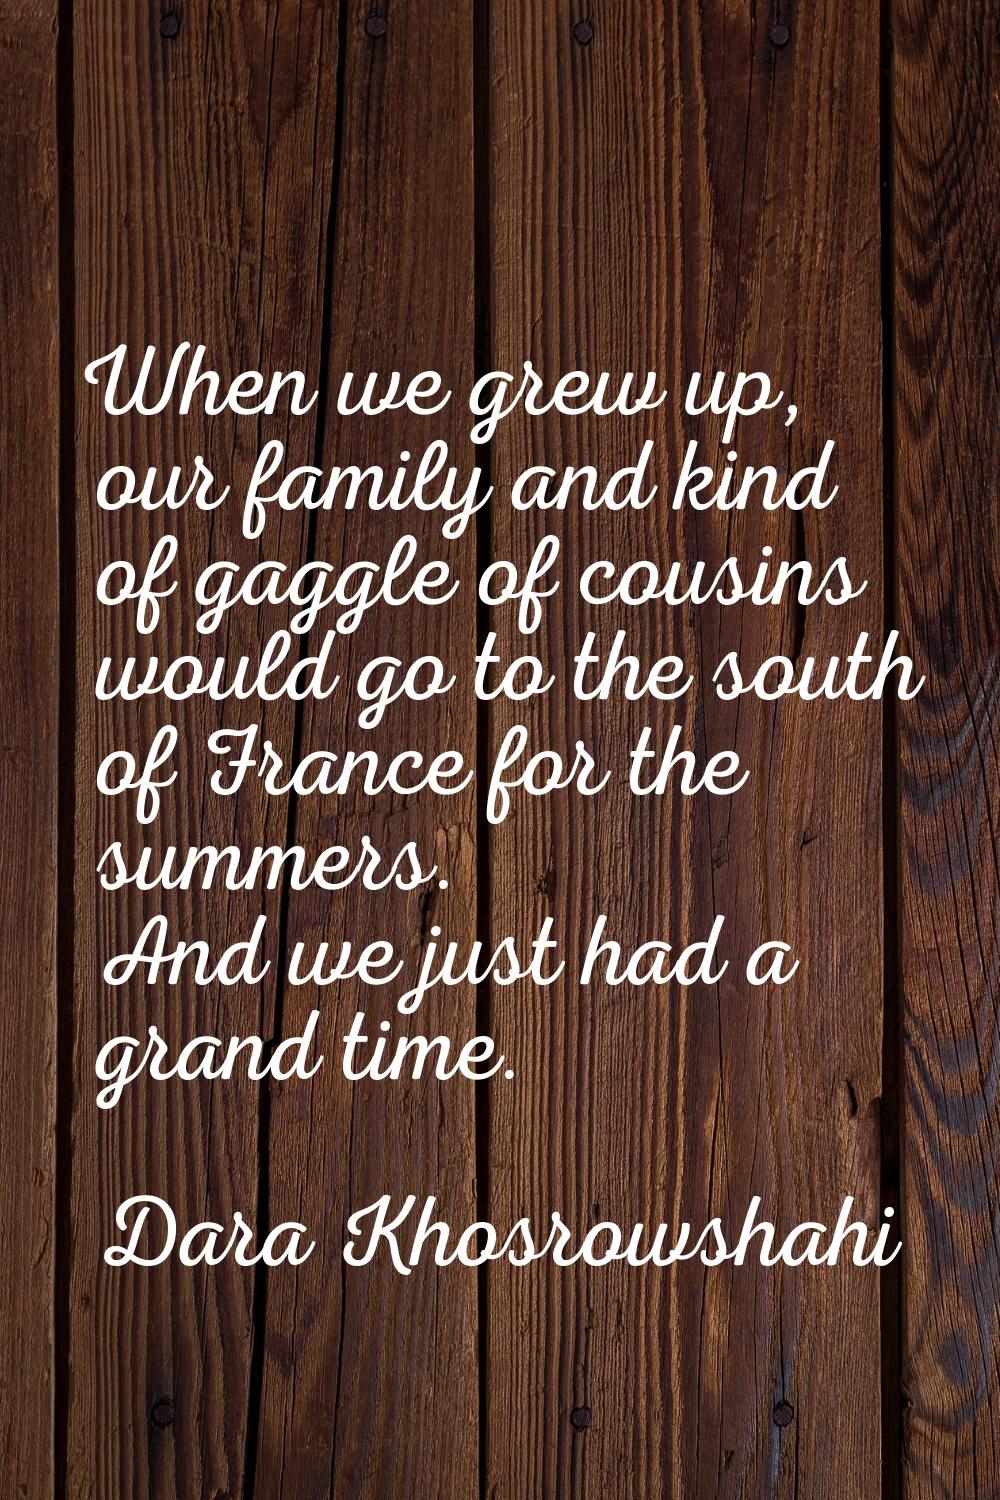 When we grew up, our family and kind of gaggle of cousins would go to the south of France for the s